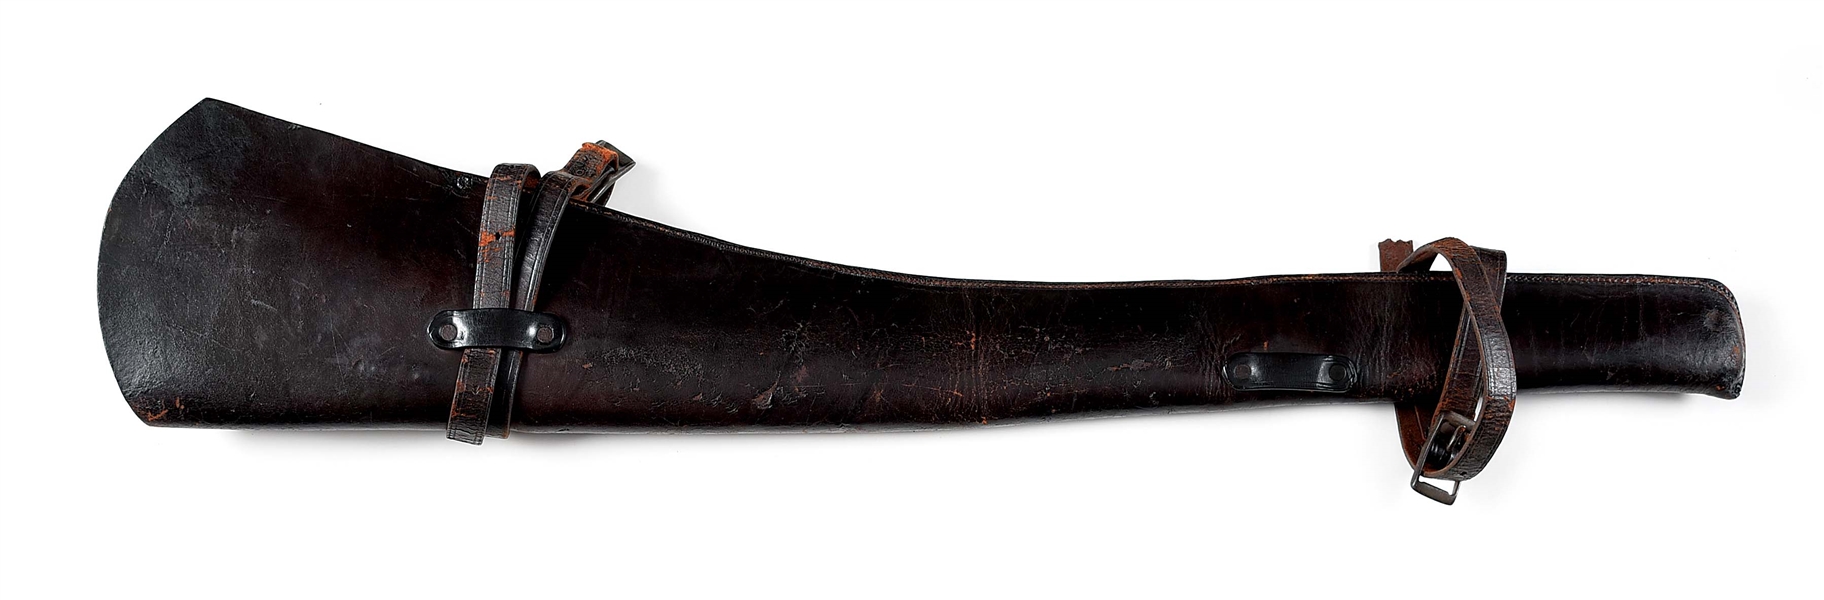 TEXAS MANUFACTURED RIFLE SCABBARD BY J. STROMBERG OF ABILENE, TEXAS.